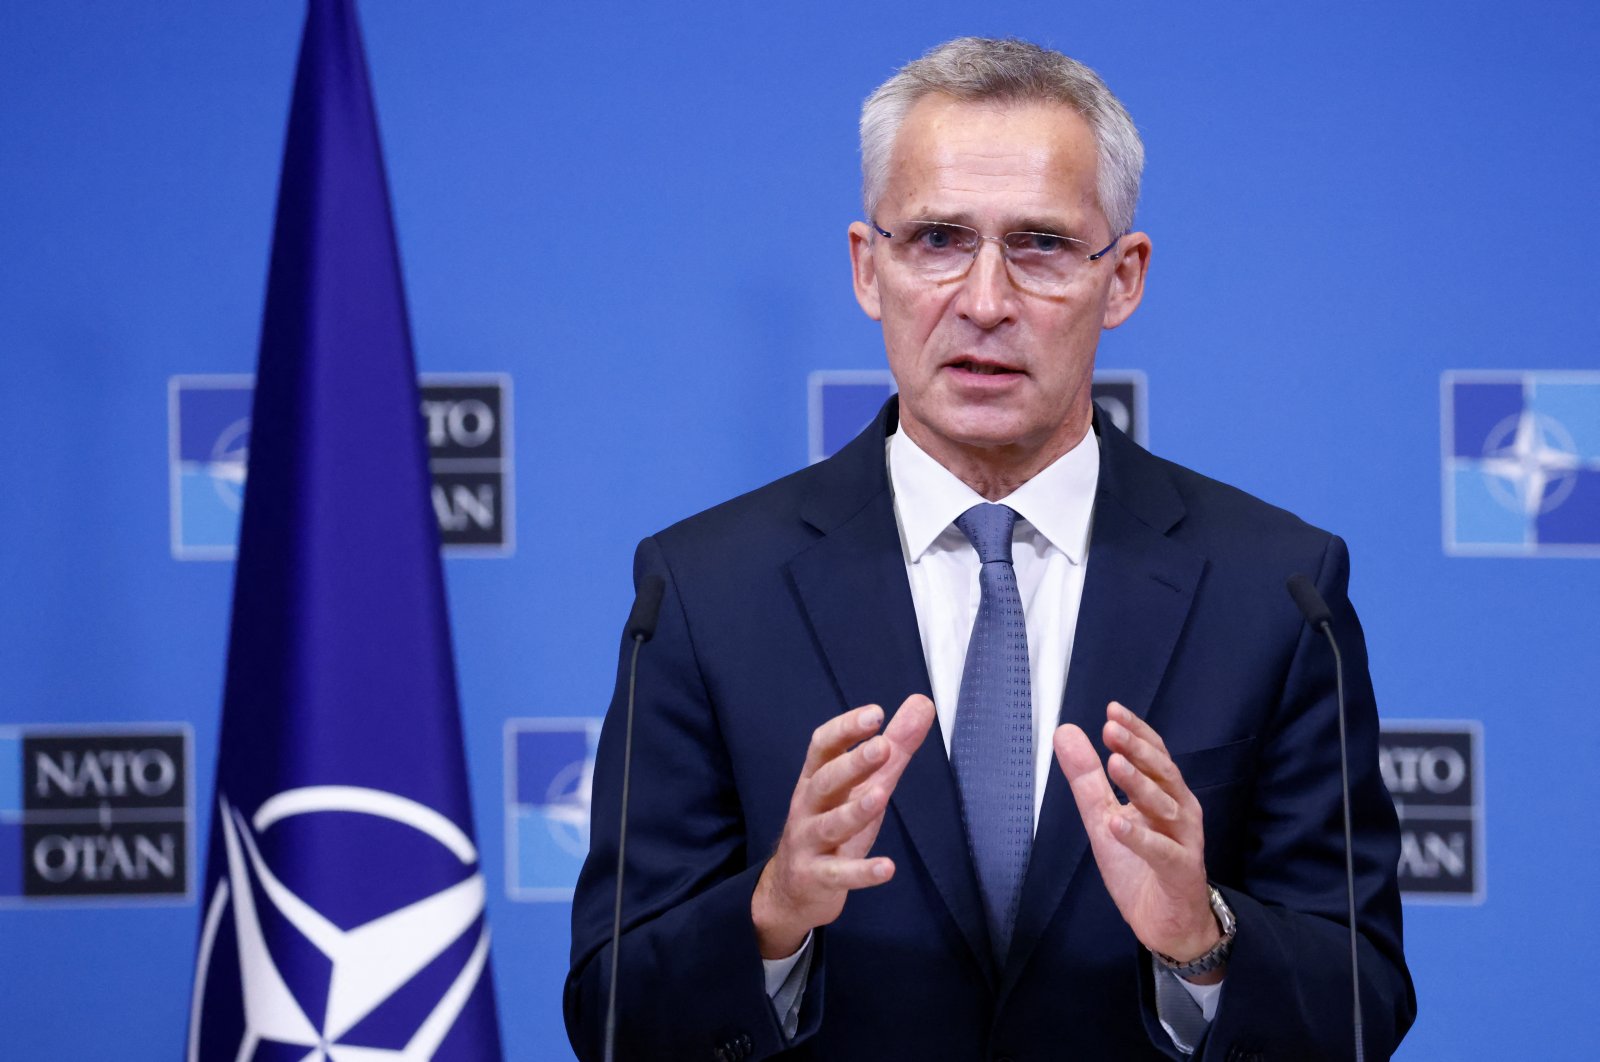 NATO Secretary-General Jens Stoltenberg attends a joint news conference with Romanian Prime Minister Nicolae Ciuca at the Alliance&#039;s headquarters in Brussels, Belgium, Oct. 26, 2022. (REUTERS Photo)